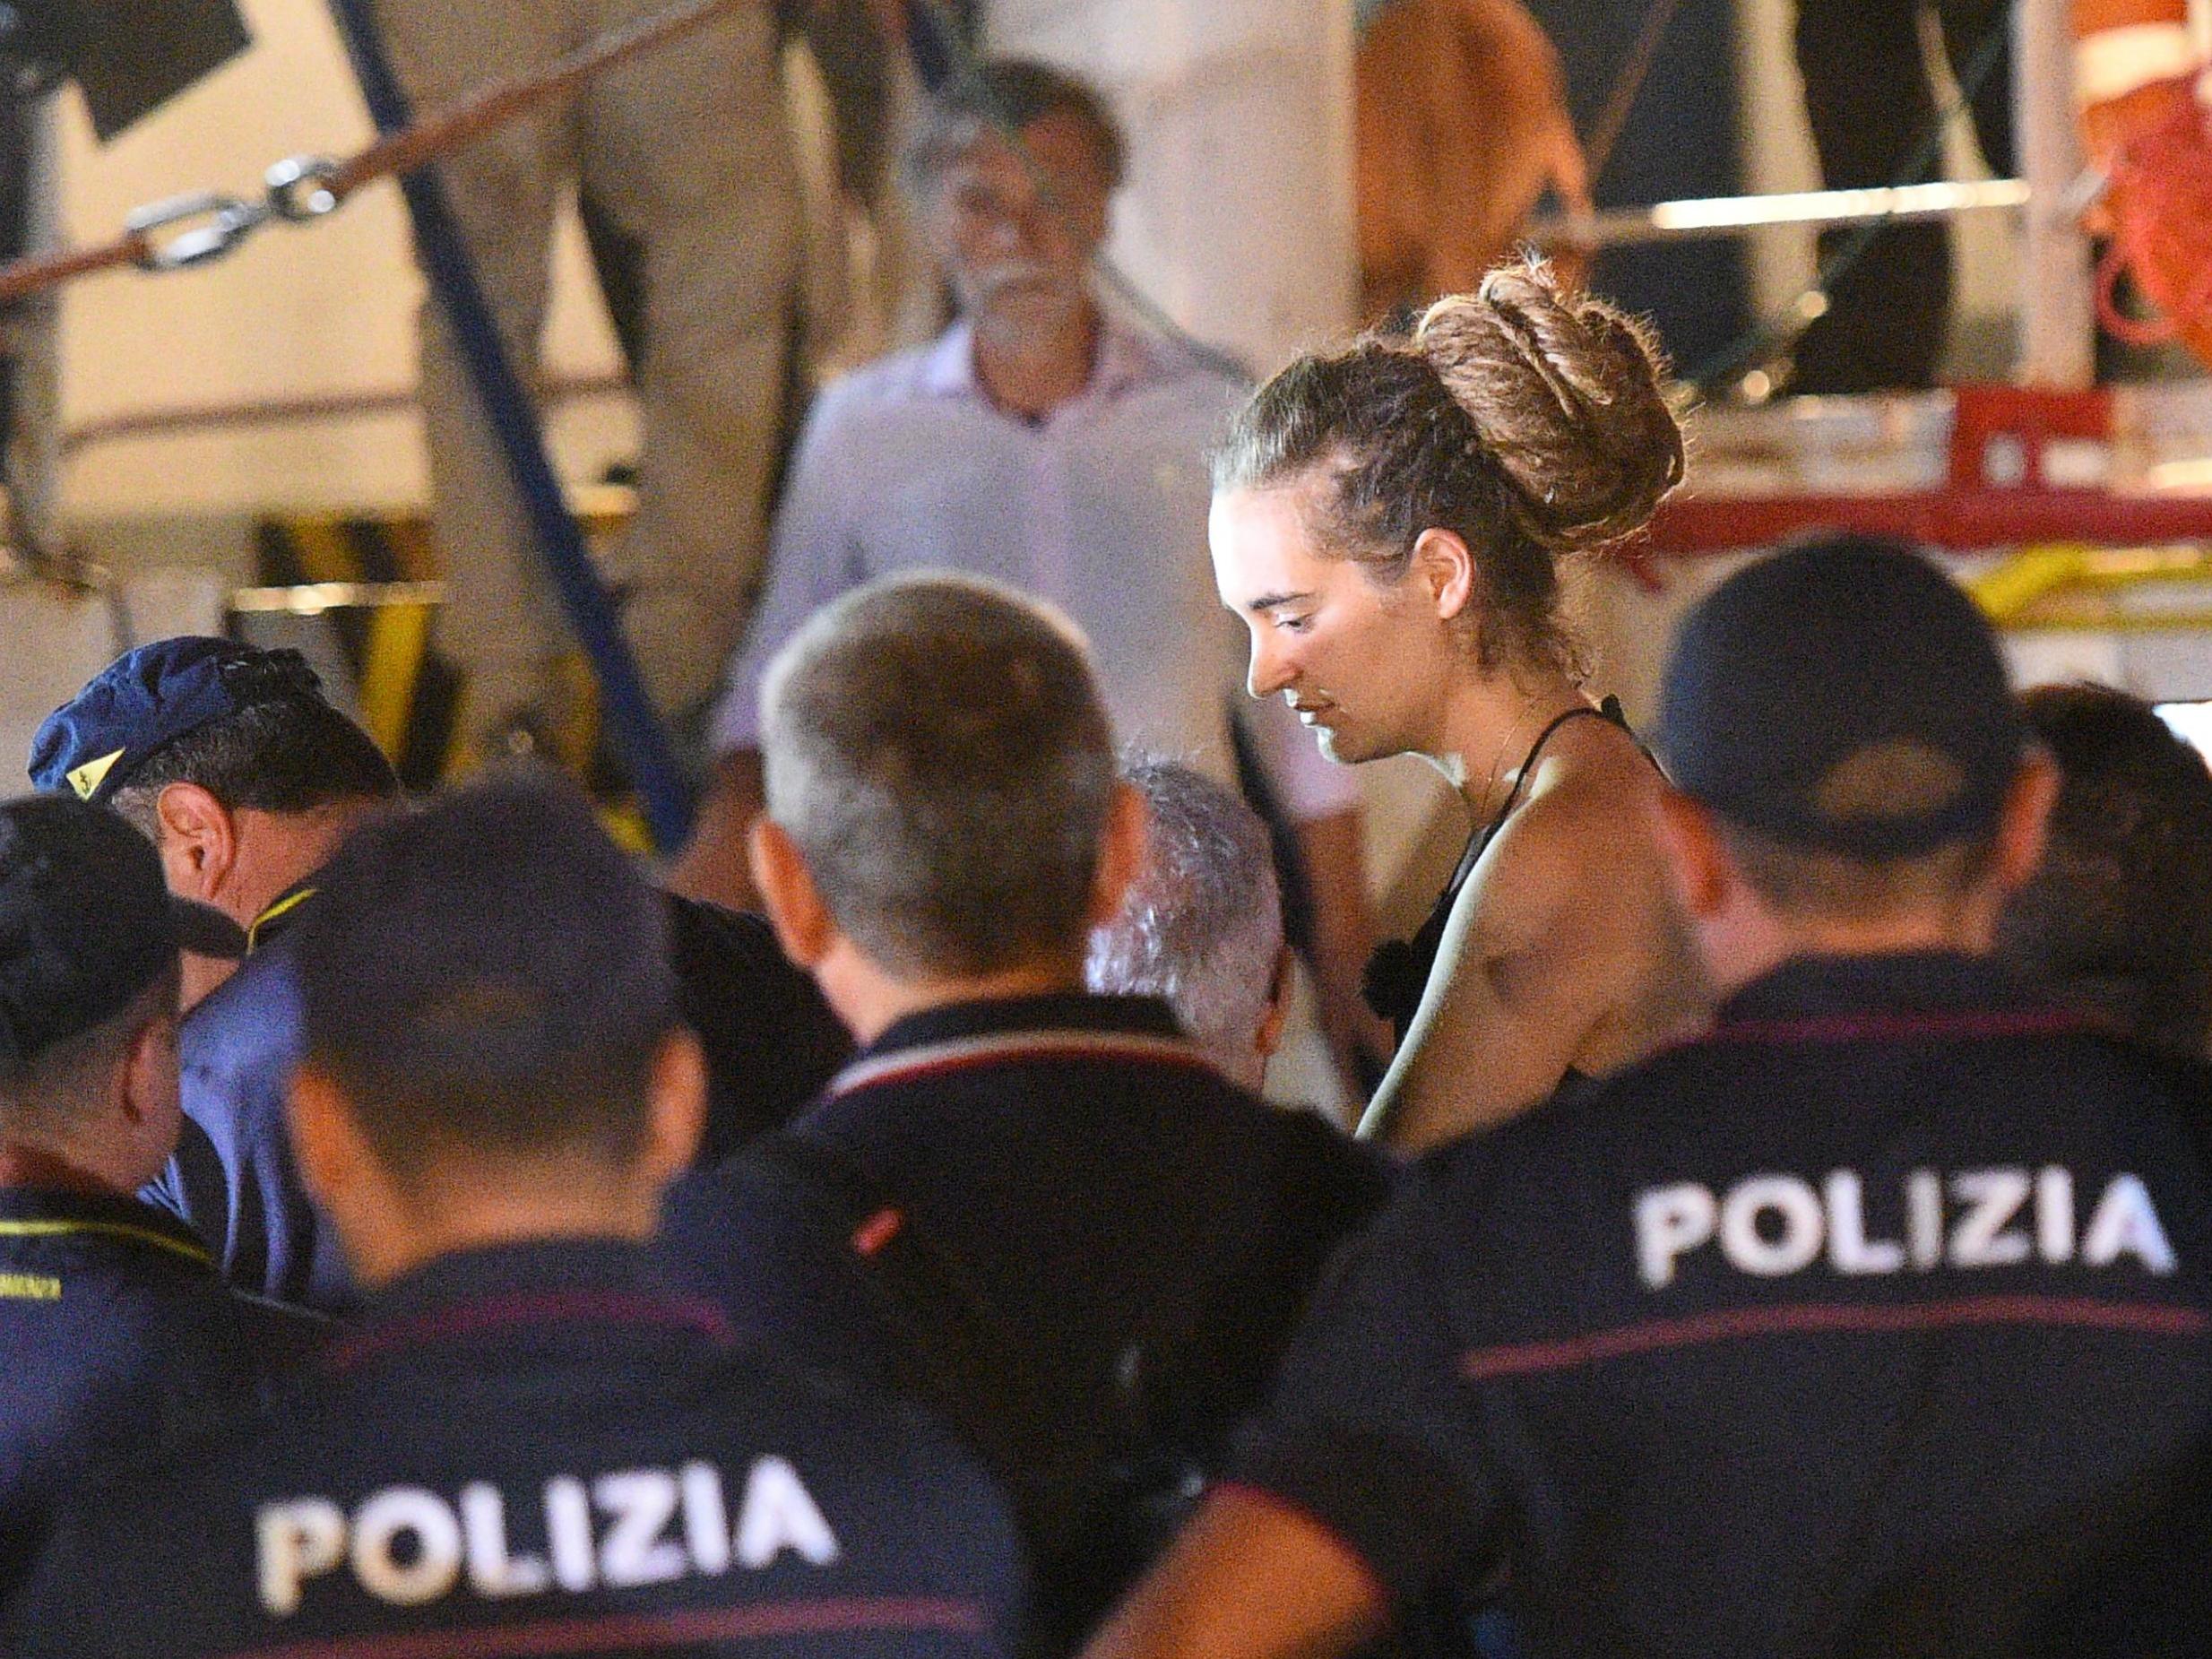 Carola Rackete, the 31-year-old Sea-Watch 3 captain, is escorted off the ship by police and taken away for questioning, in Lampedusa, Italy on 29 June 2019.